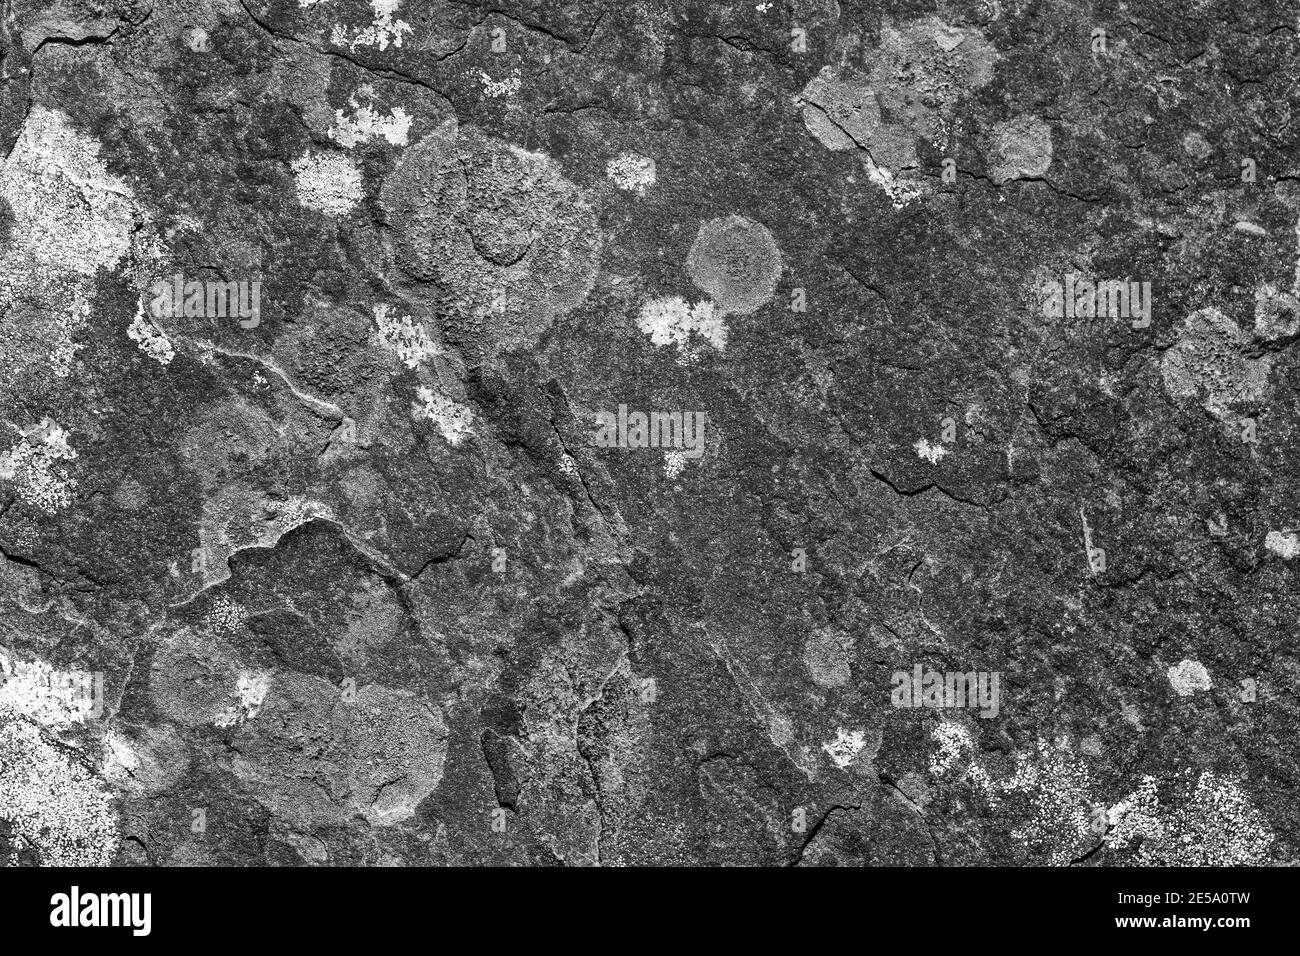 Stone wall grunge style textured close up background stained black and white monochrome image with an abstract lichen texture surface, stock photo Stock Photo